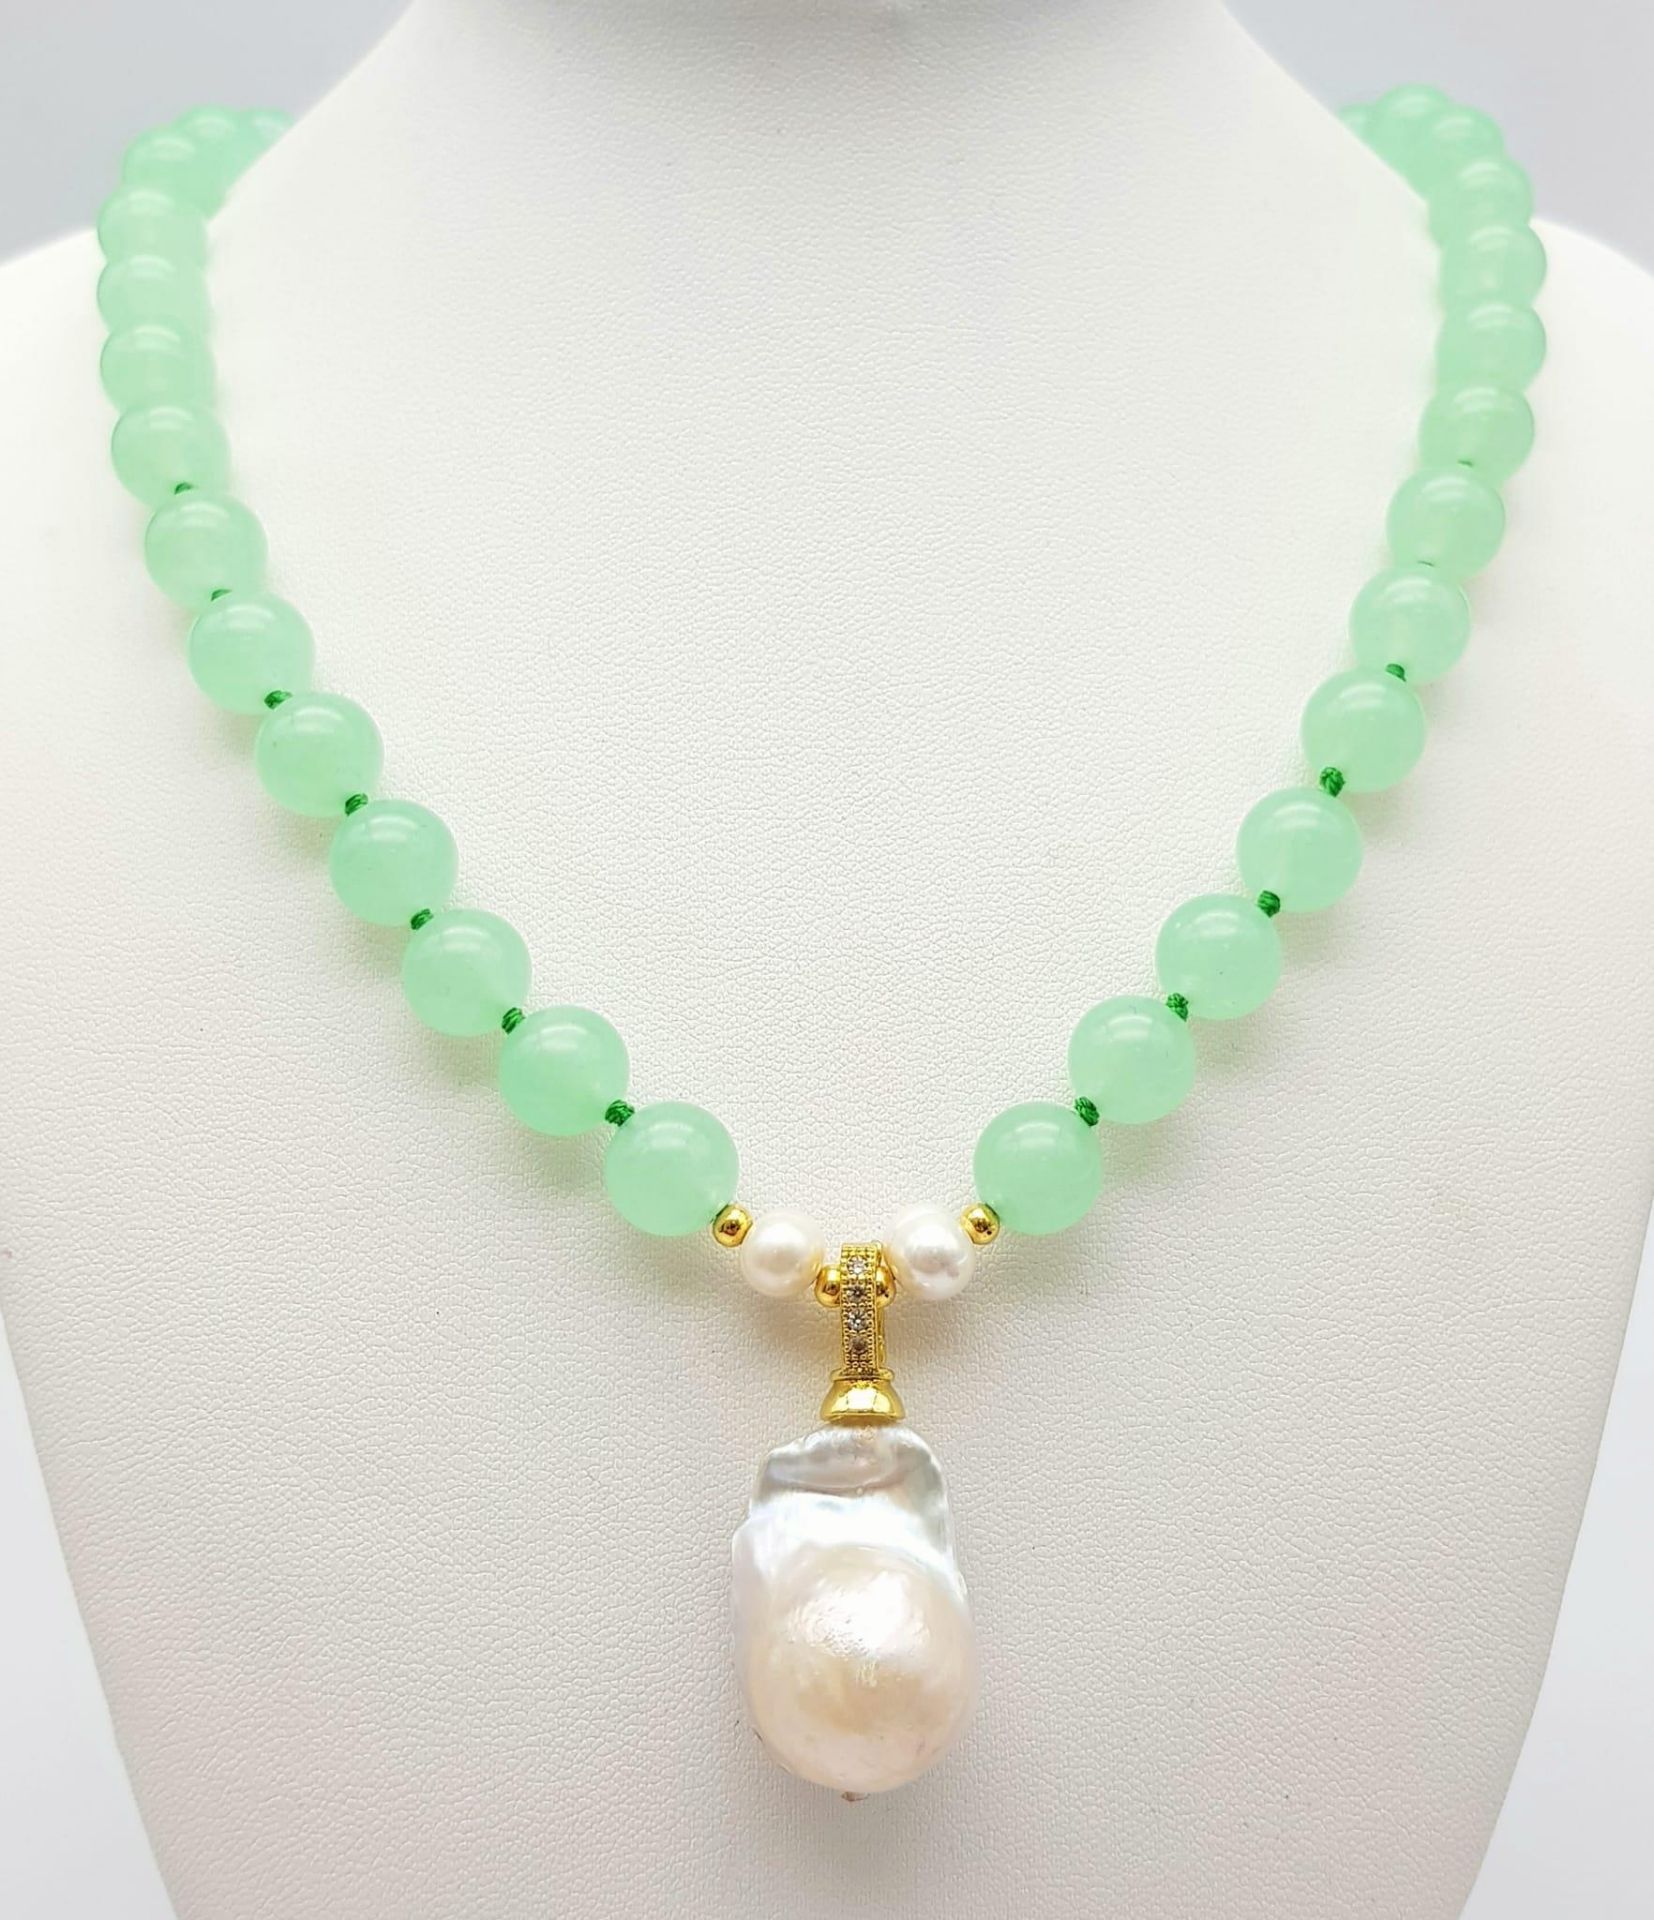 A Pale Green Jade Bead Necklace with Keisha Pearl Drop Pendant. 10mm jade beads with cultured